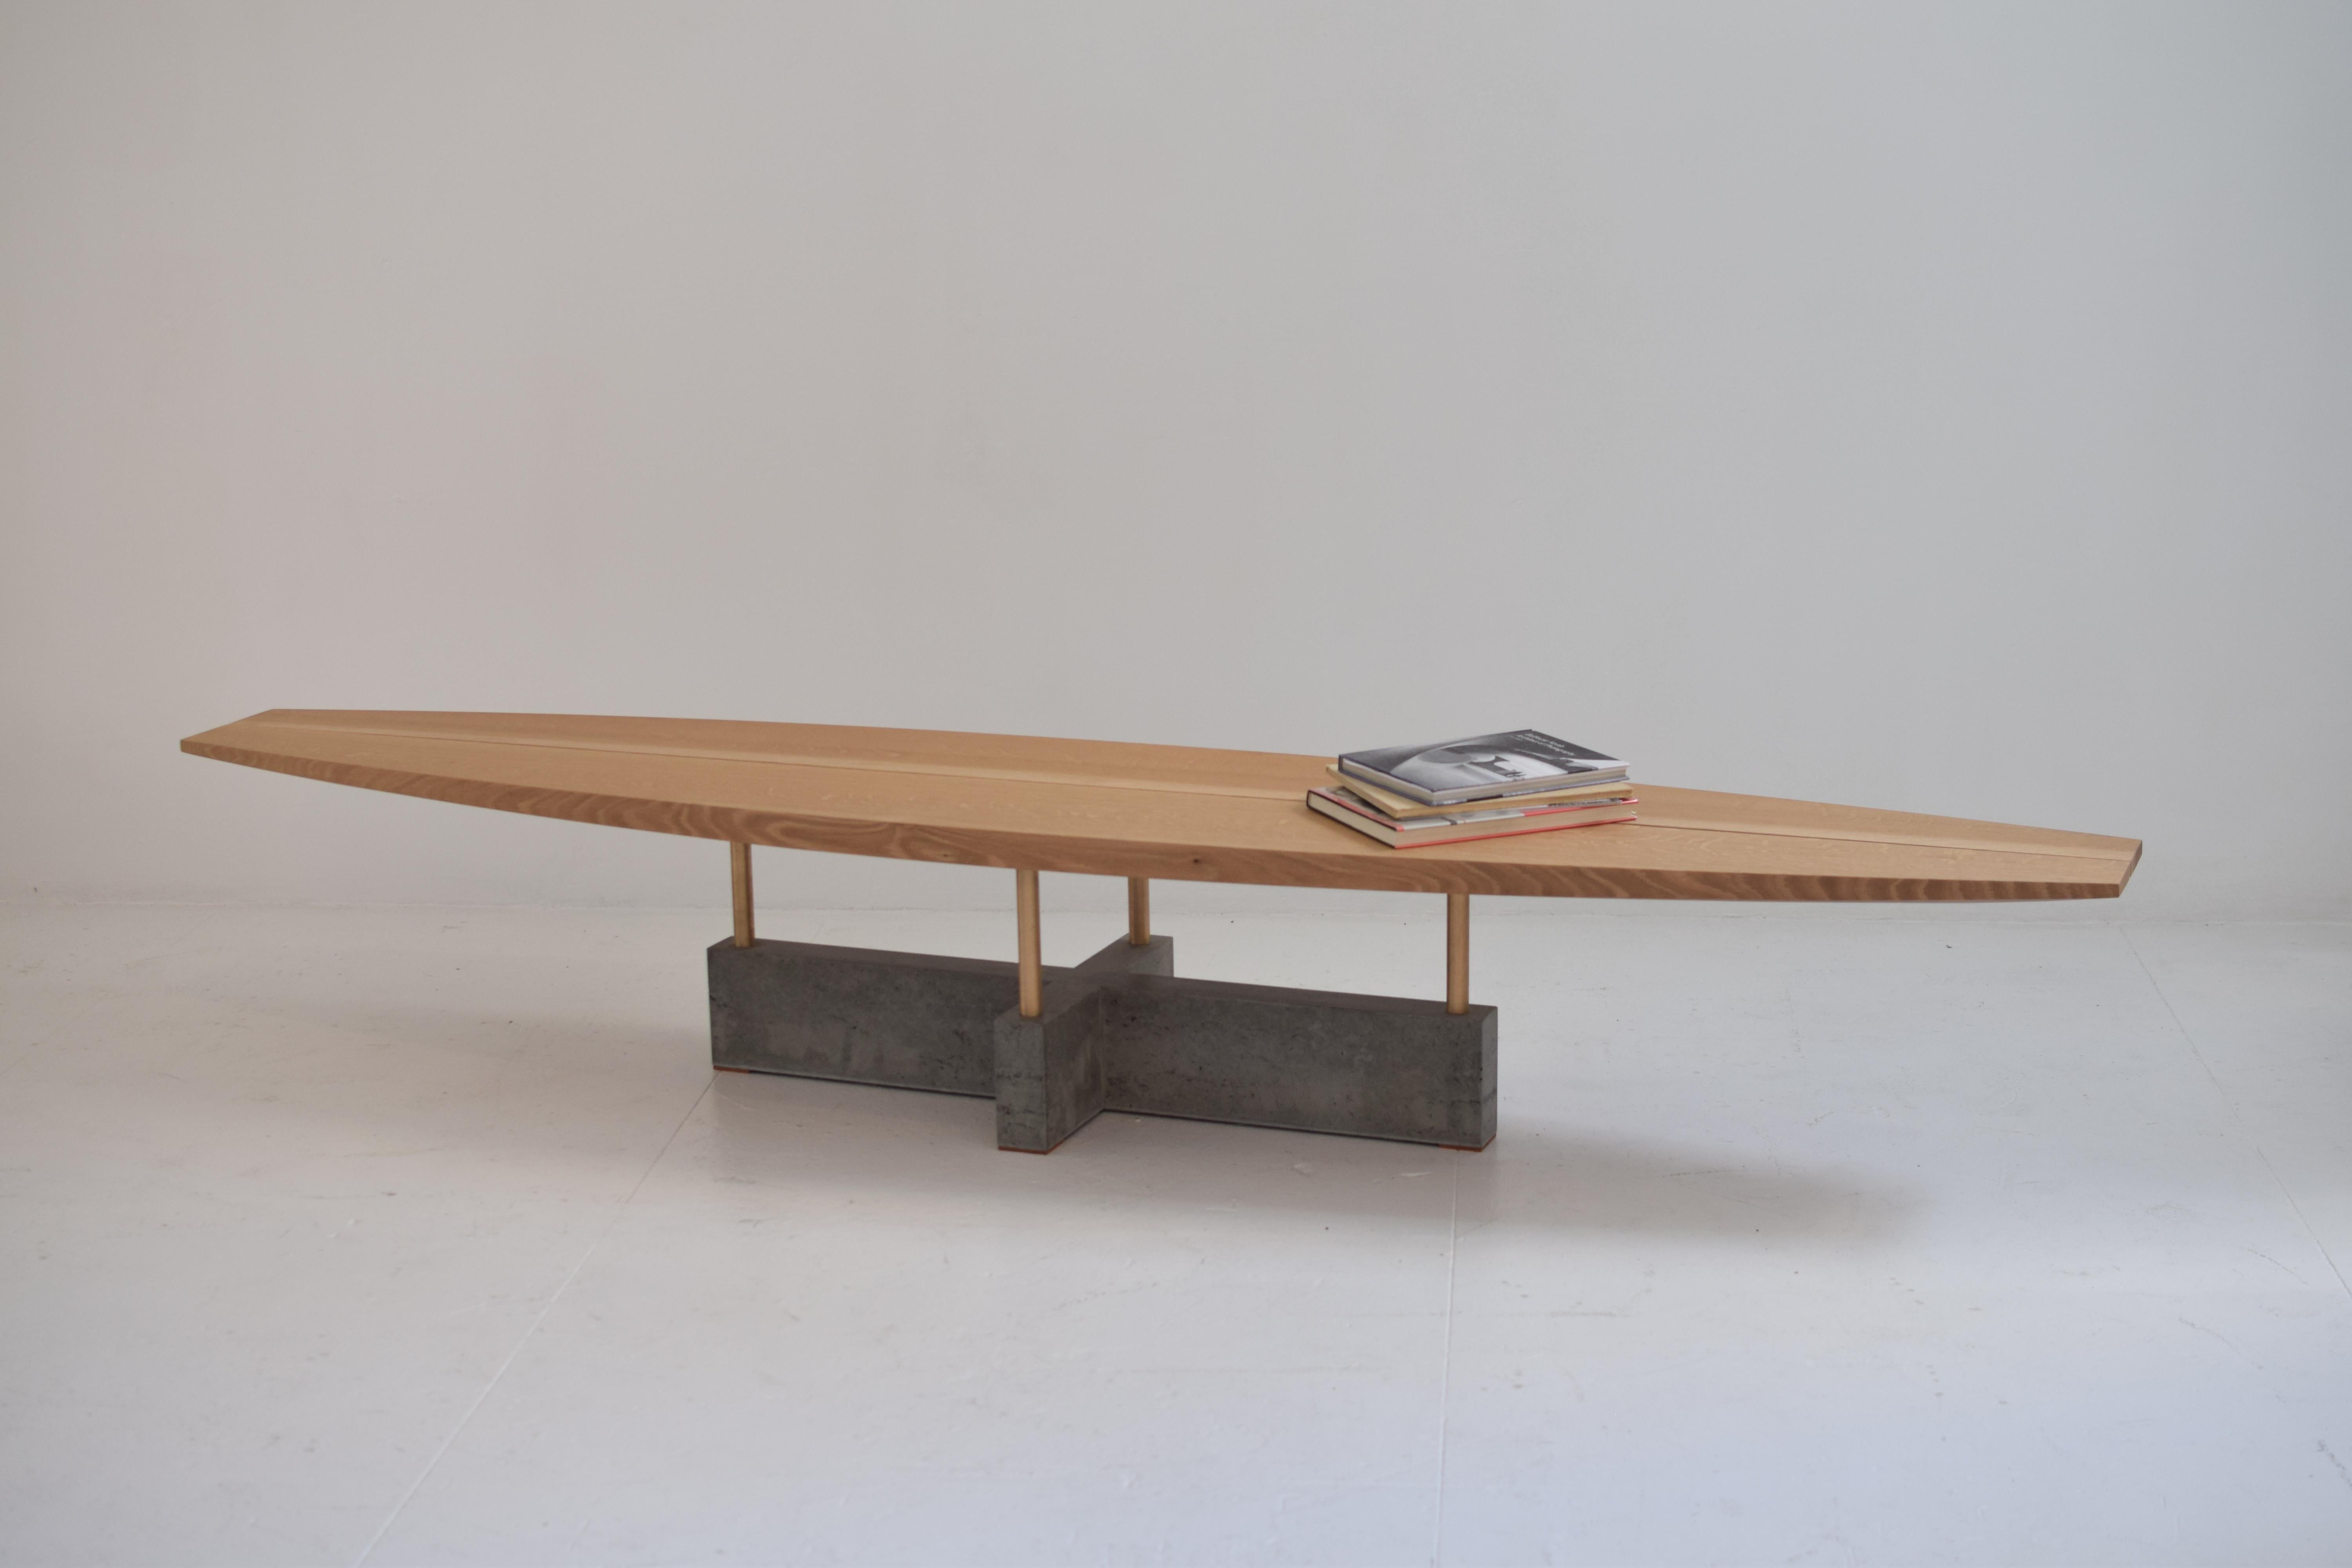 Cantilever bench/table

This bench/table brings together sculptural form and Minimalist aesthetic. The carved wooden bench paired with the smooth geometric base is the center of attention in any room. The hand-shaped surfboard top is two wooden